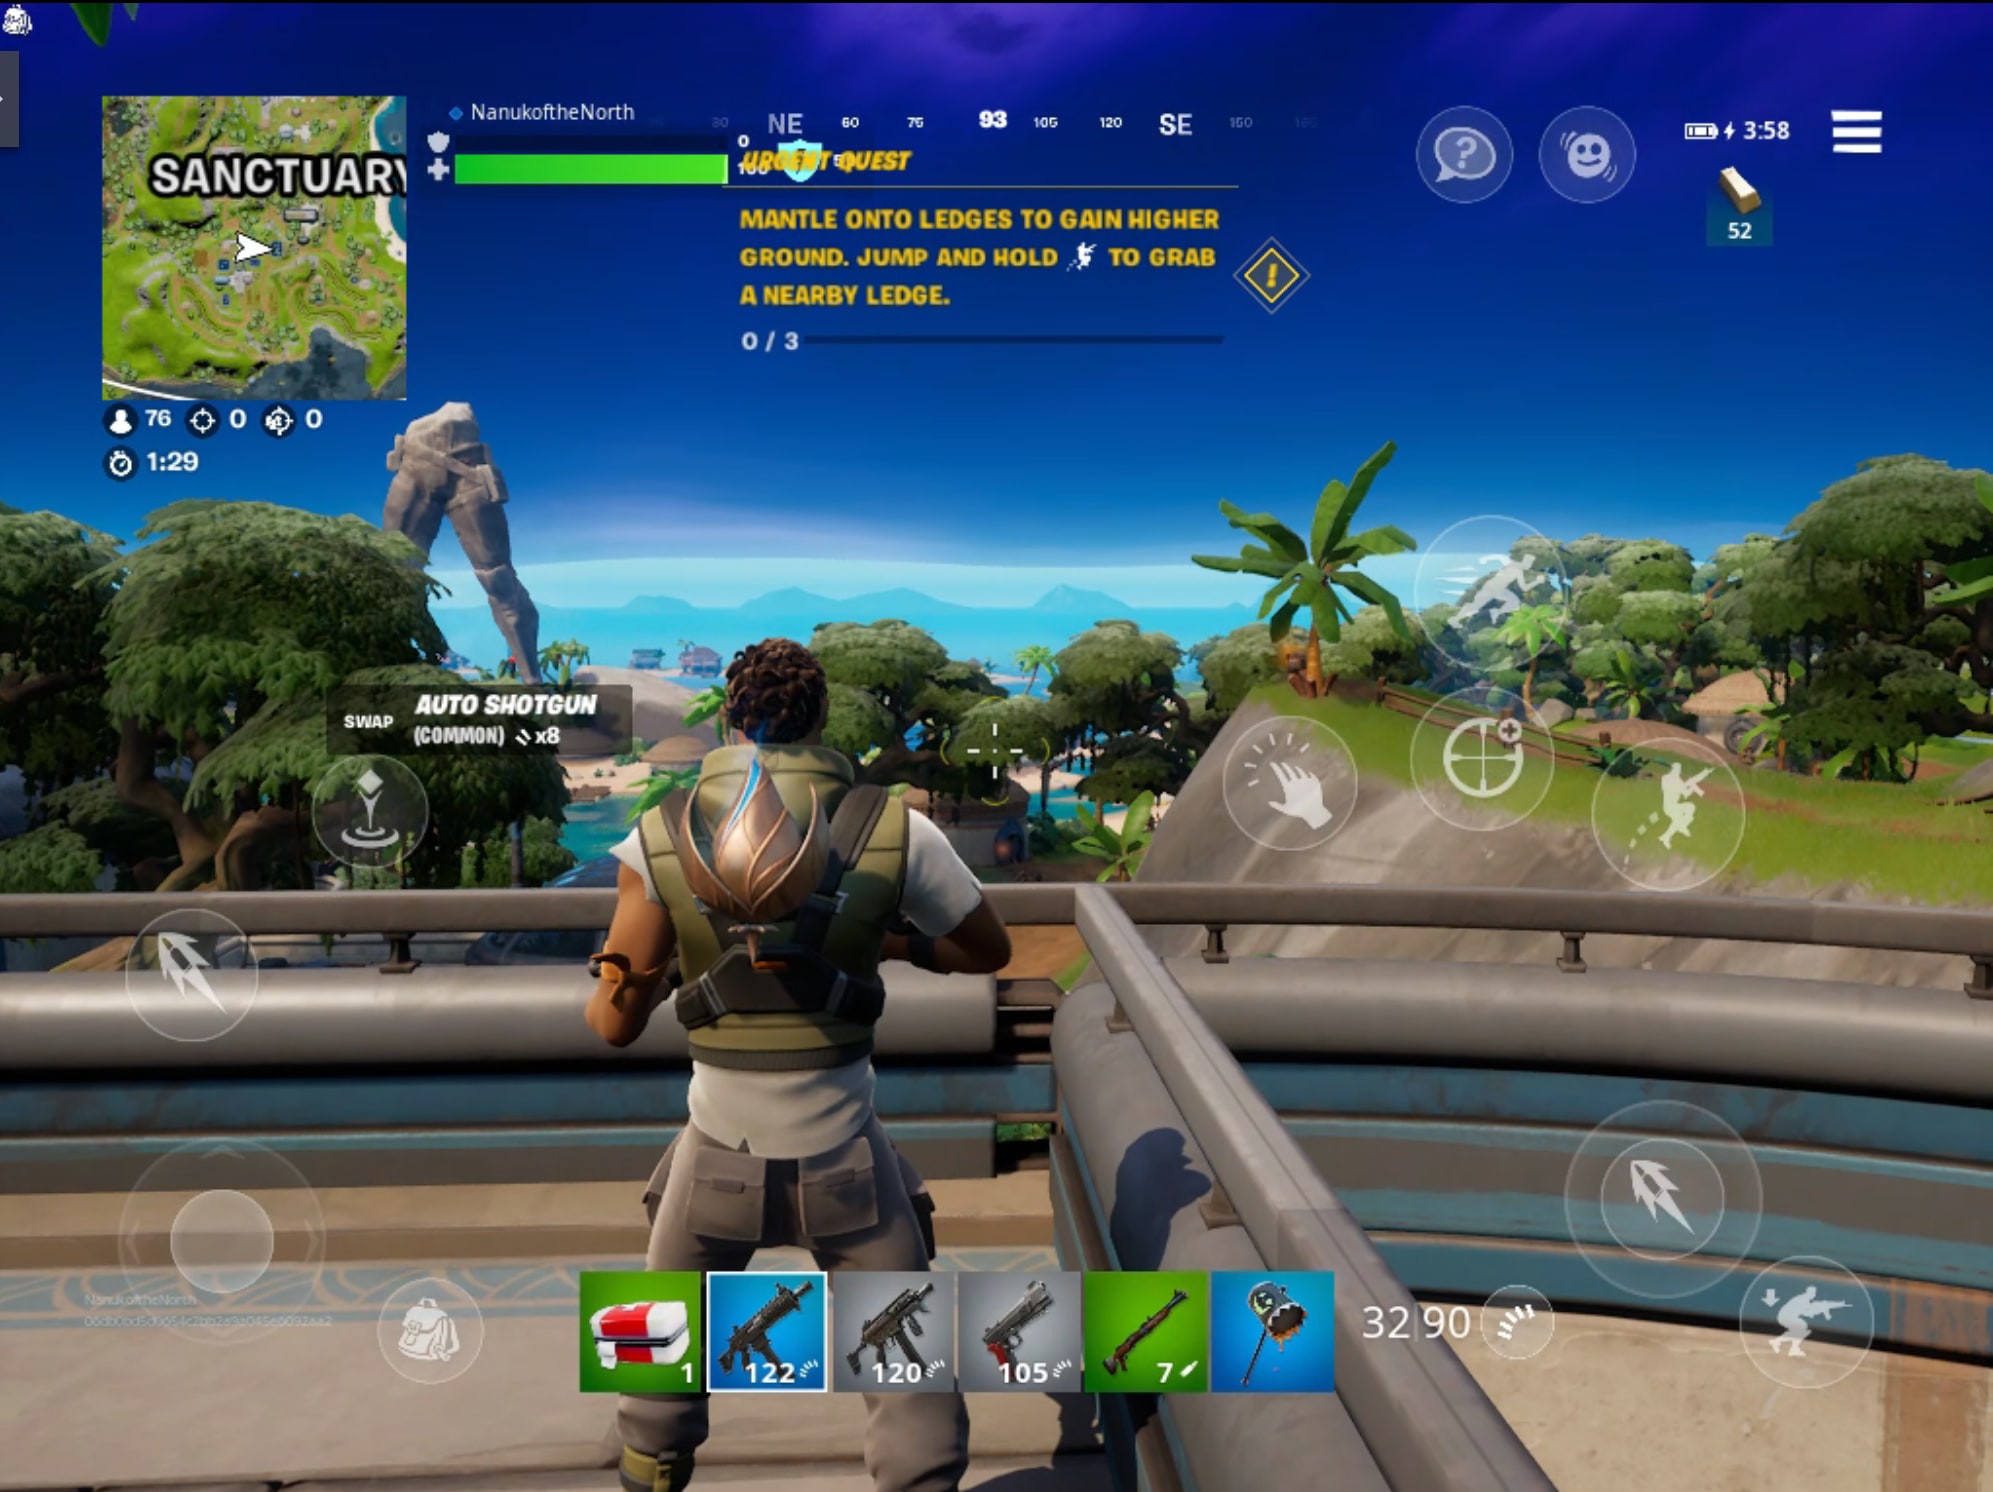 A screenshots showing a touch-optimized mobile version of Fortnite from Epic Games running on Nvidia's GeForce Now service